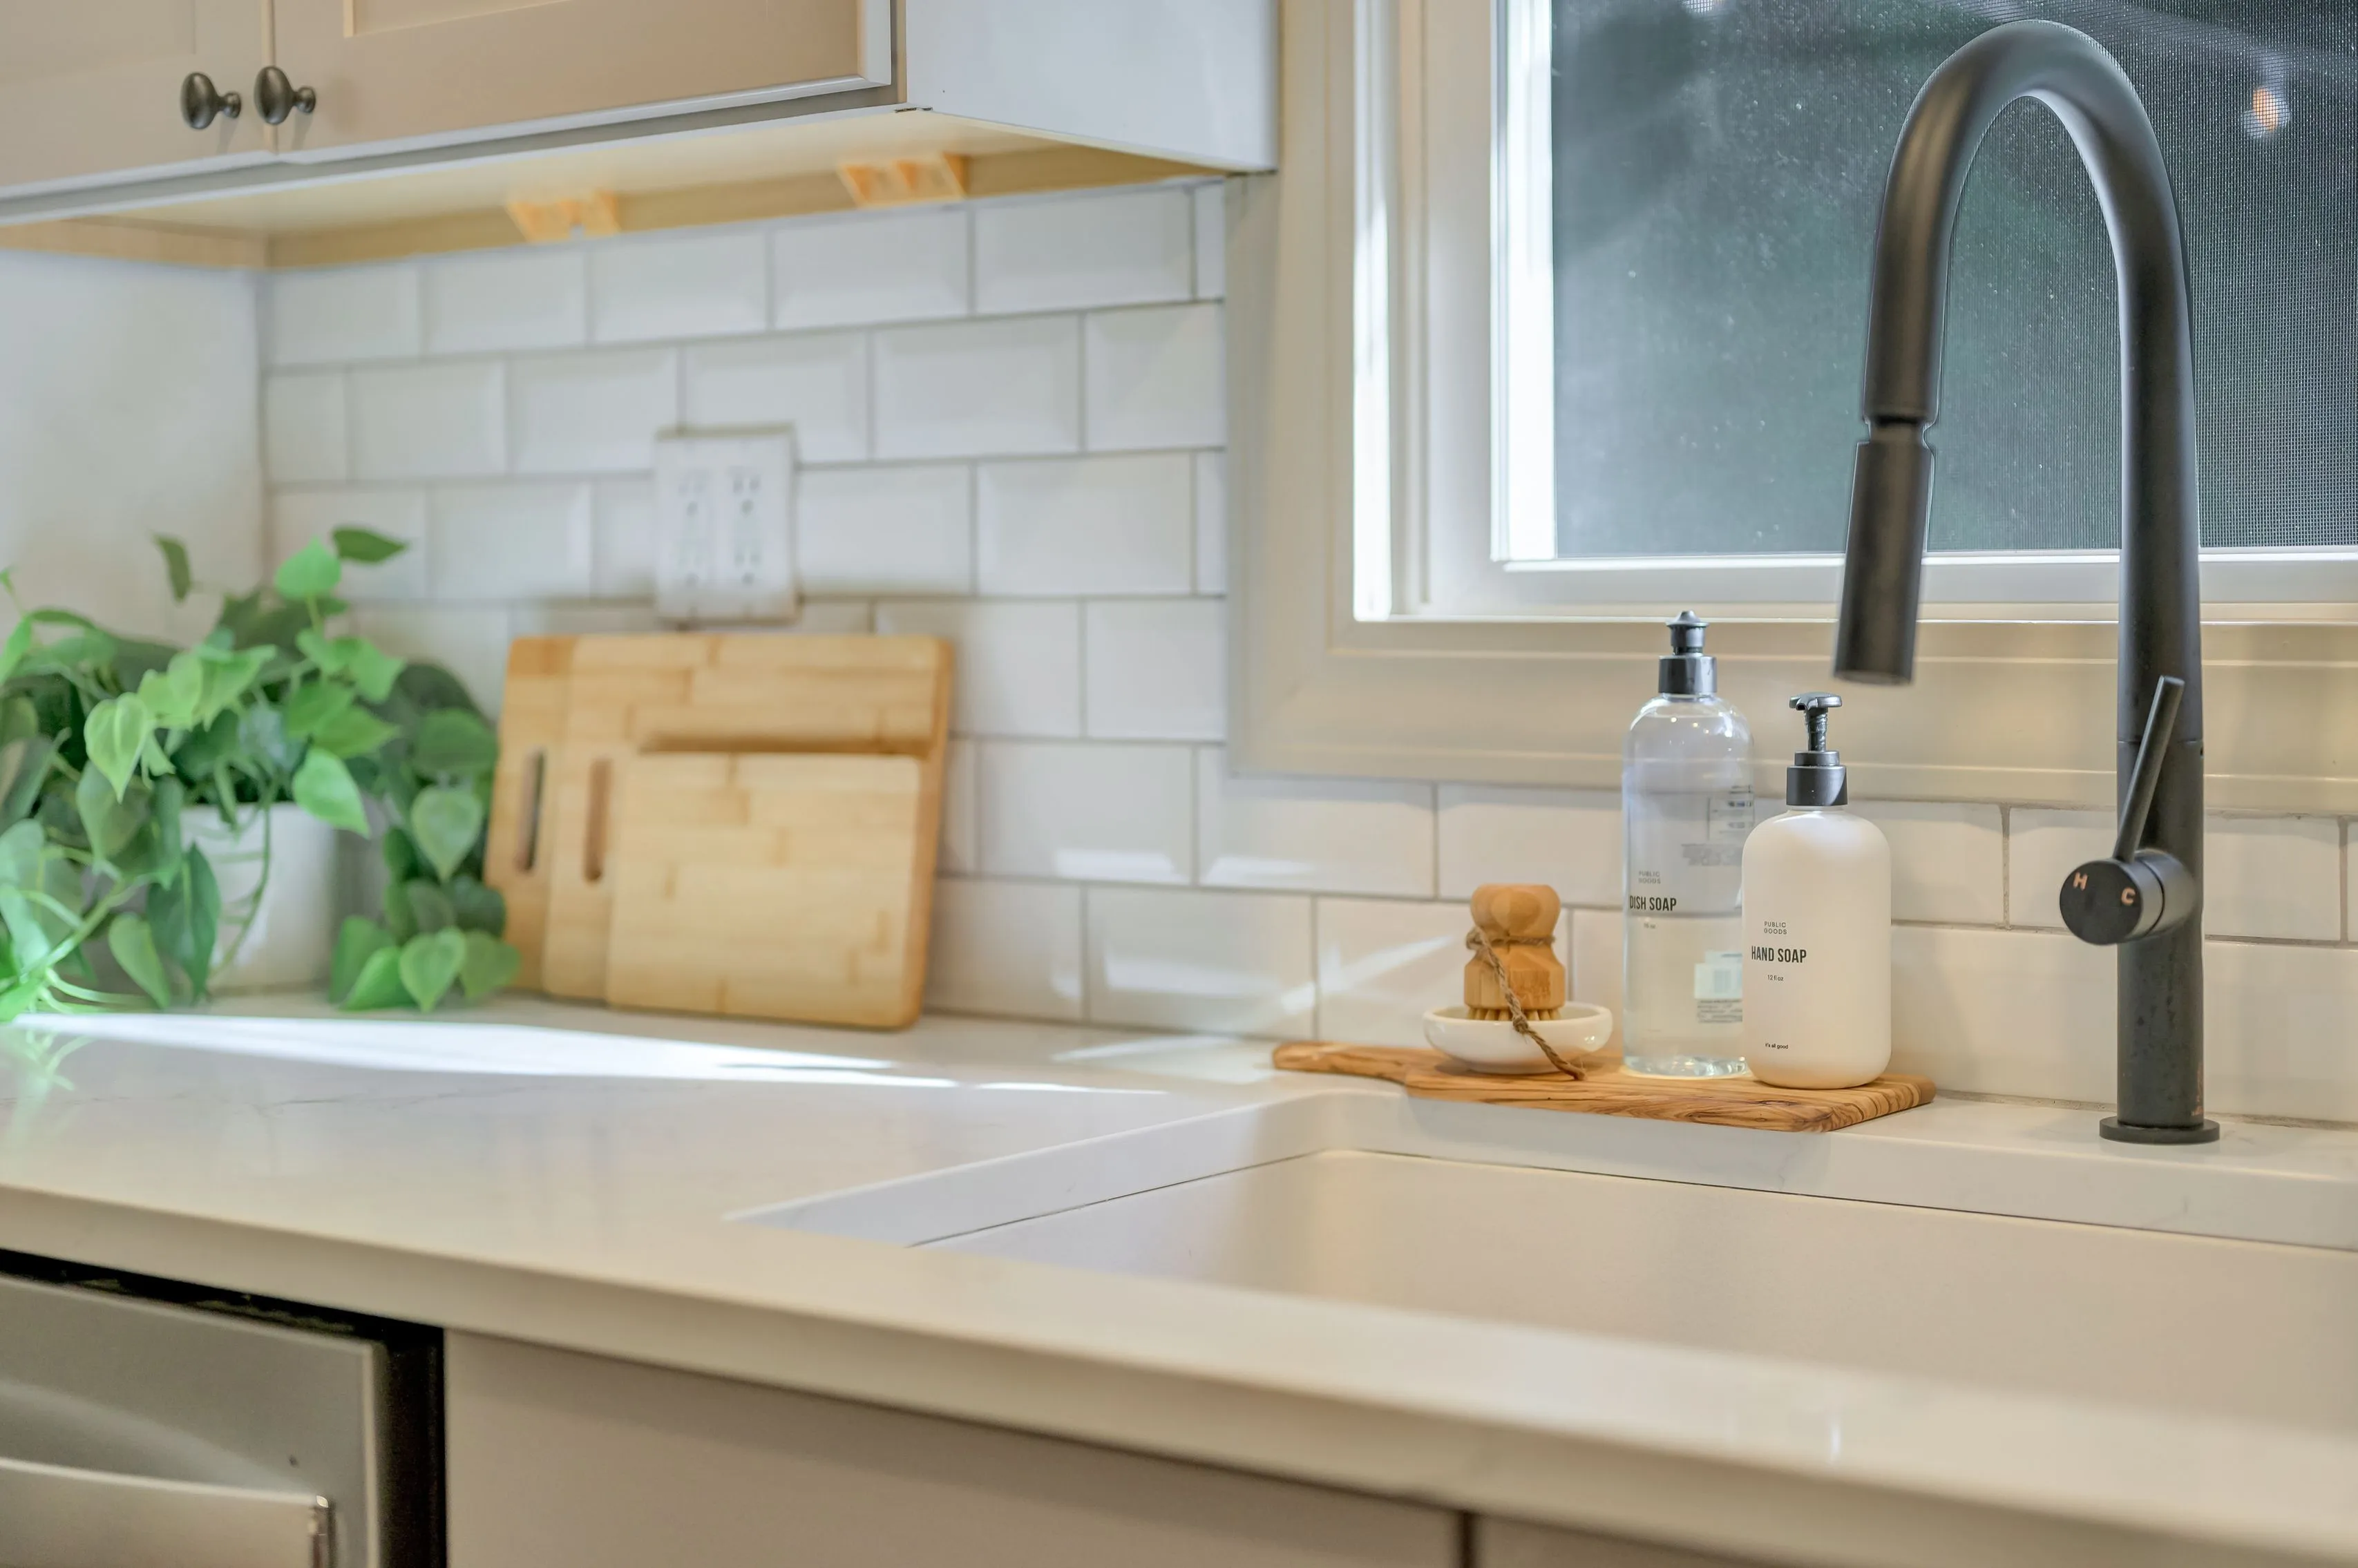 Modern kitchen interior with white countertops, subway tile backsplash, and a black faucet, also showing dish soap on a tray, cutting boards, and a potted plant.